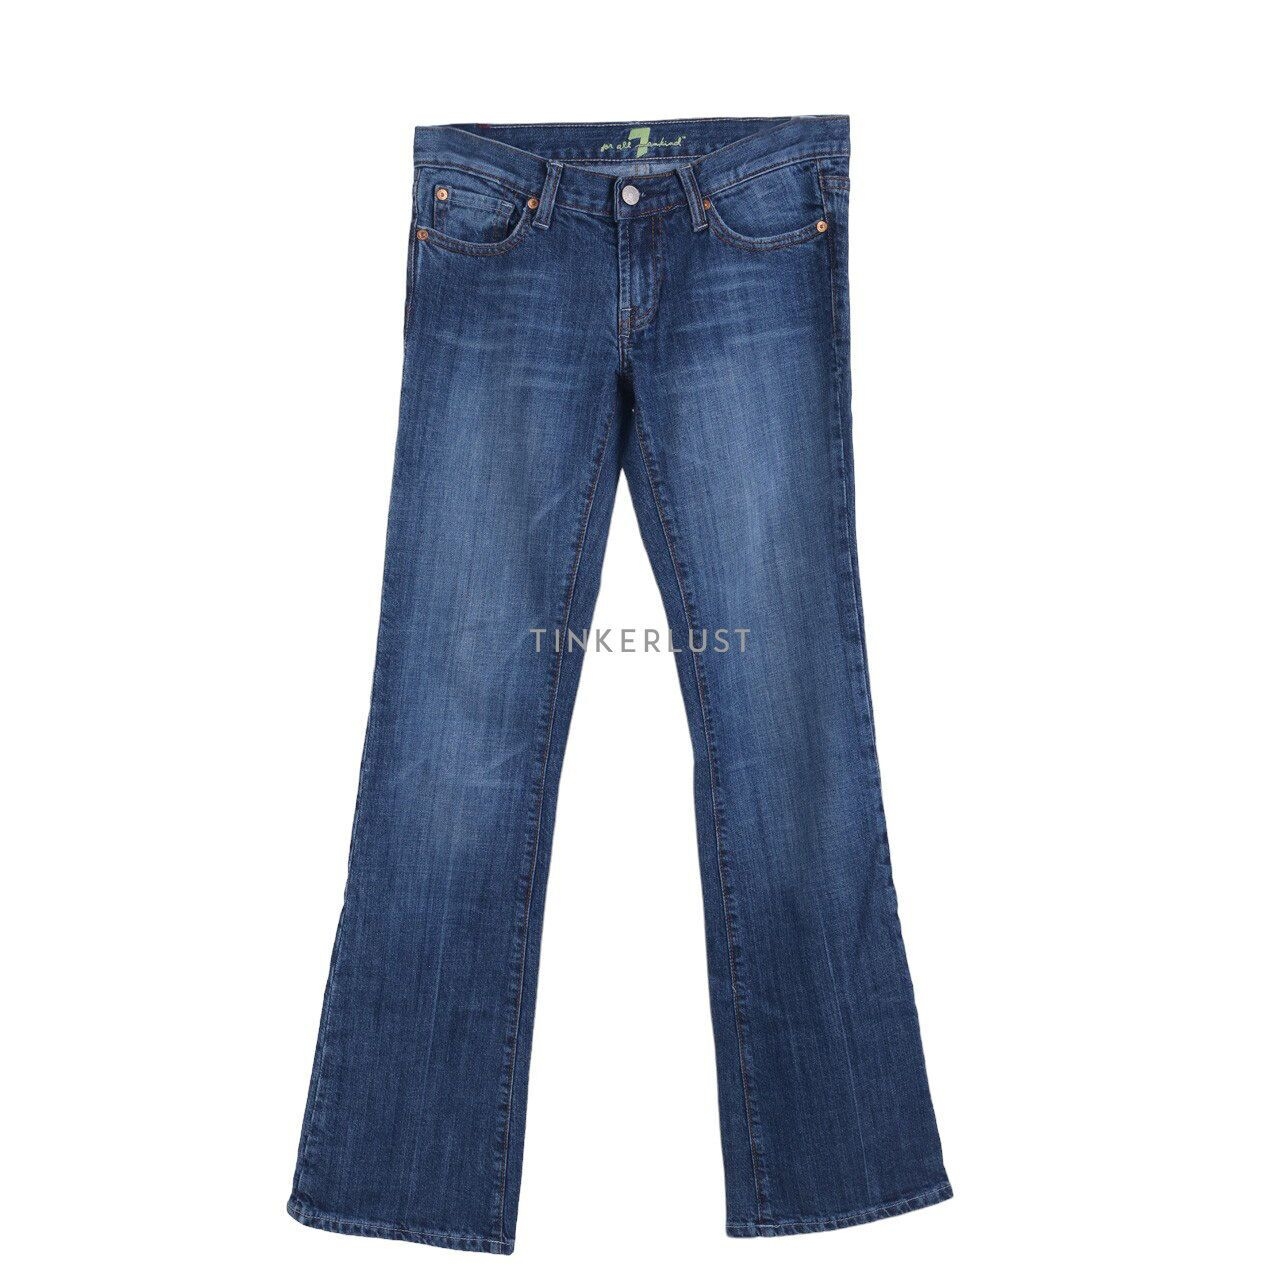 7 For All Mankind Dark Blue Jeans Long Pants